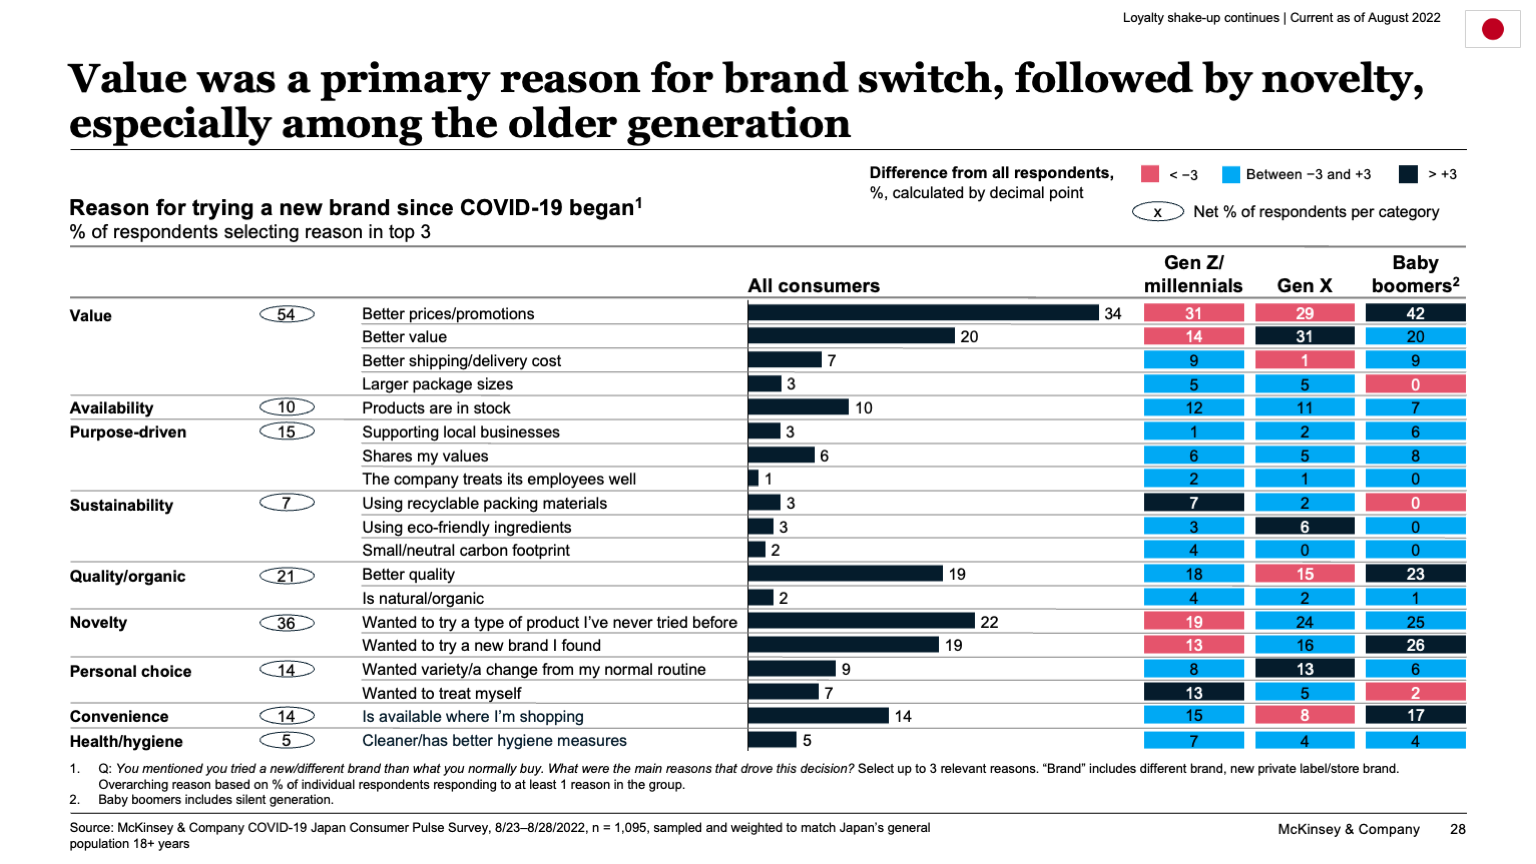 Value was a primary reason for brand switch, followed by novelty, especially among the older generation